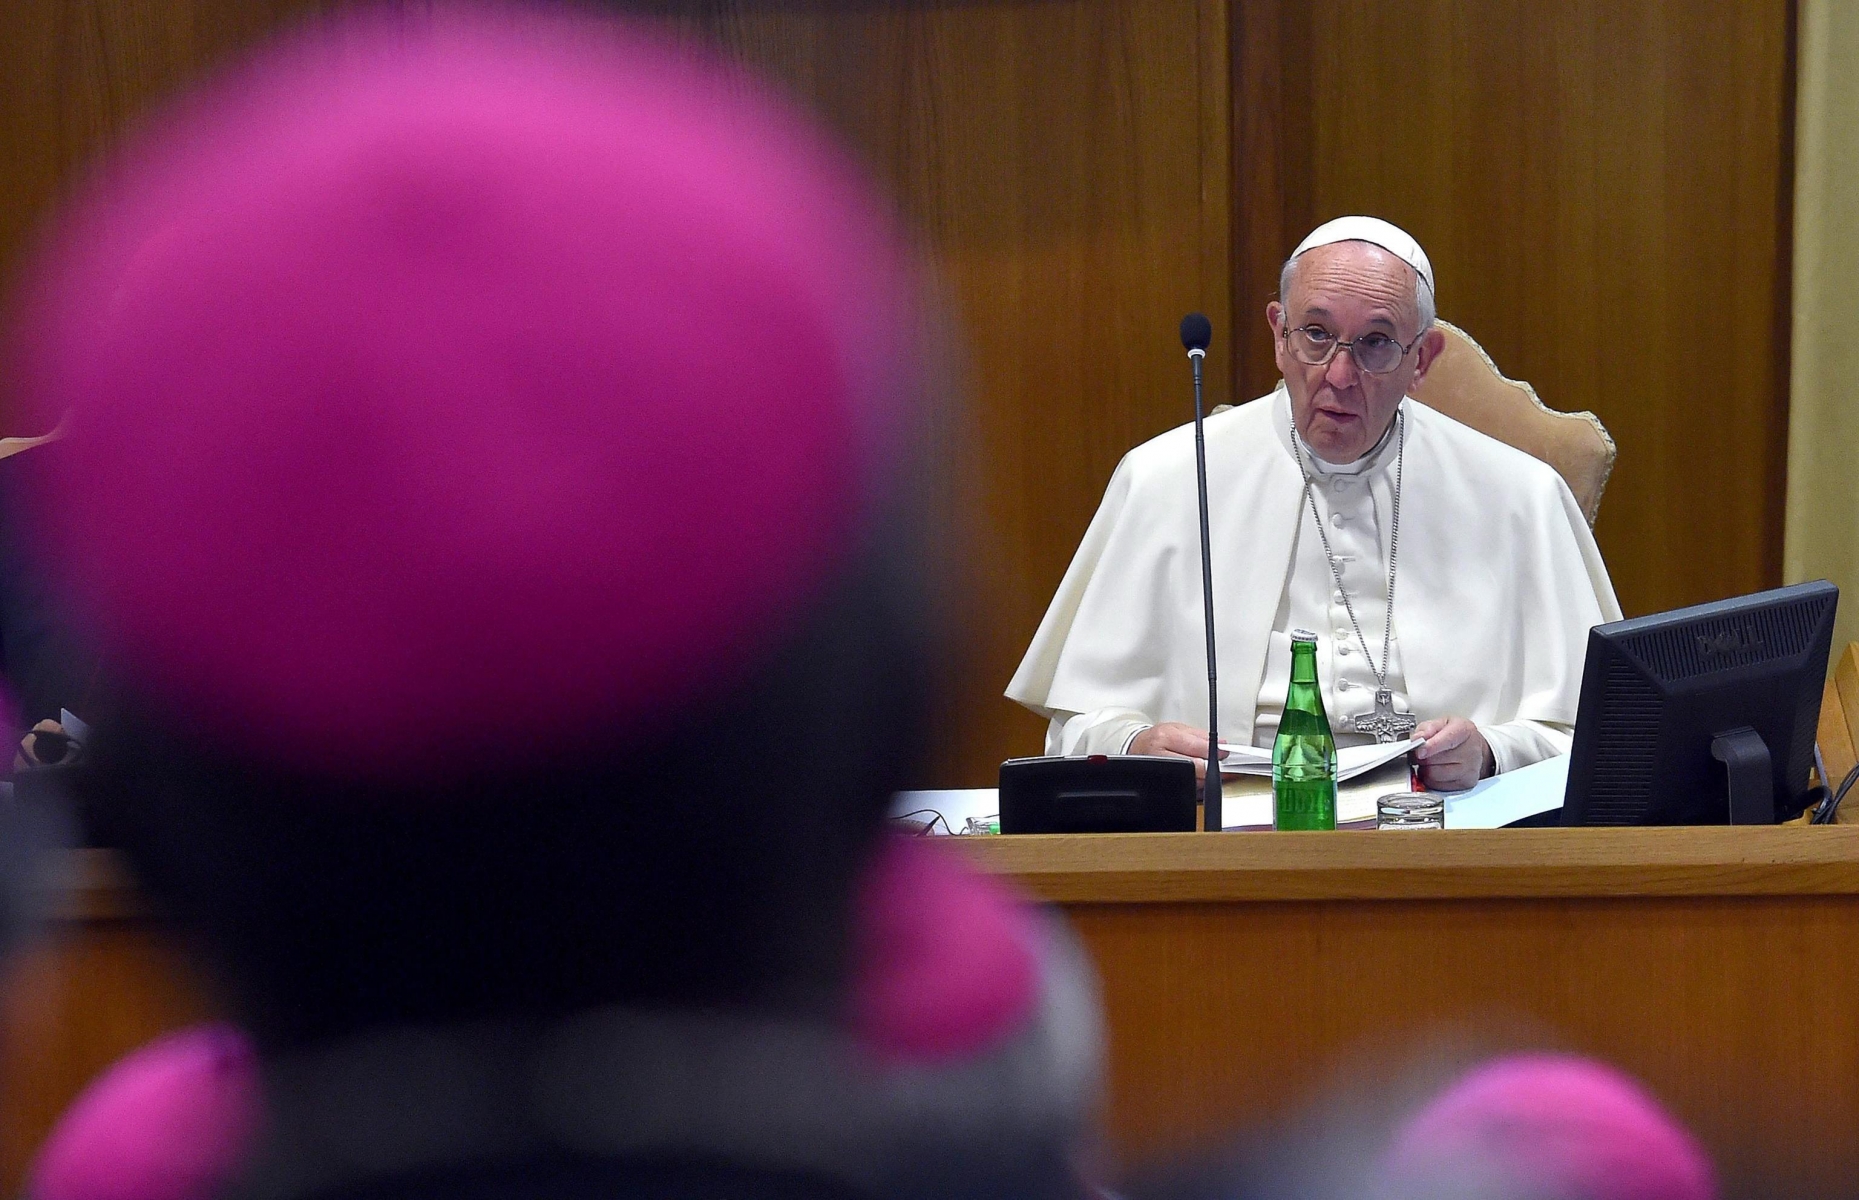 epa04992518 Pope Francis leads the XVI Ordinary Meeting of the Synod of Bishops at the Synod Hall, Vatican City, 24 October 2015. The Vatican is hosting an October 4-25 world summit of bishops, known as the synod. Participants are deeply divided on the extent to which church teachings on issues like marriage can be adapted to modern lifestyles.  EPA/ETTORE FERRARI VATICAN SYNOD